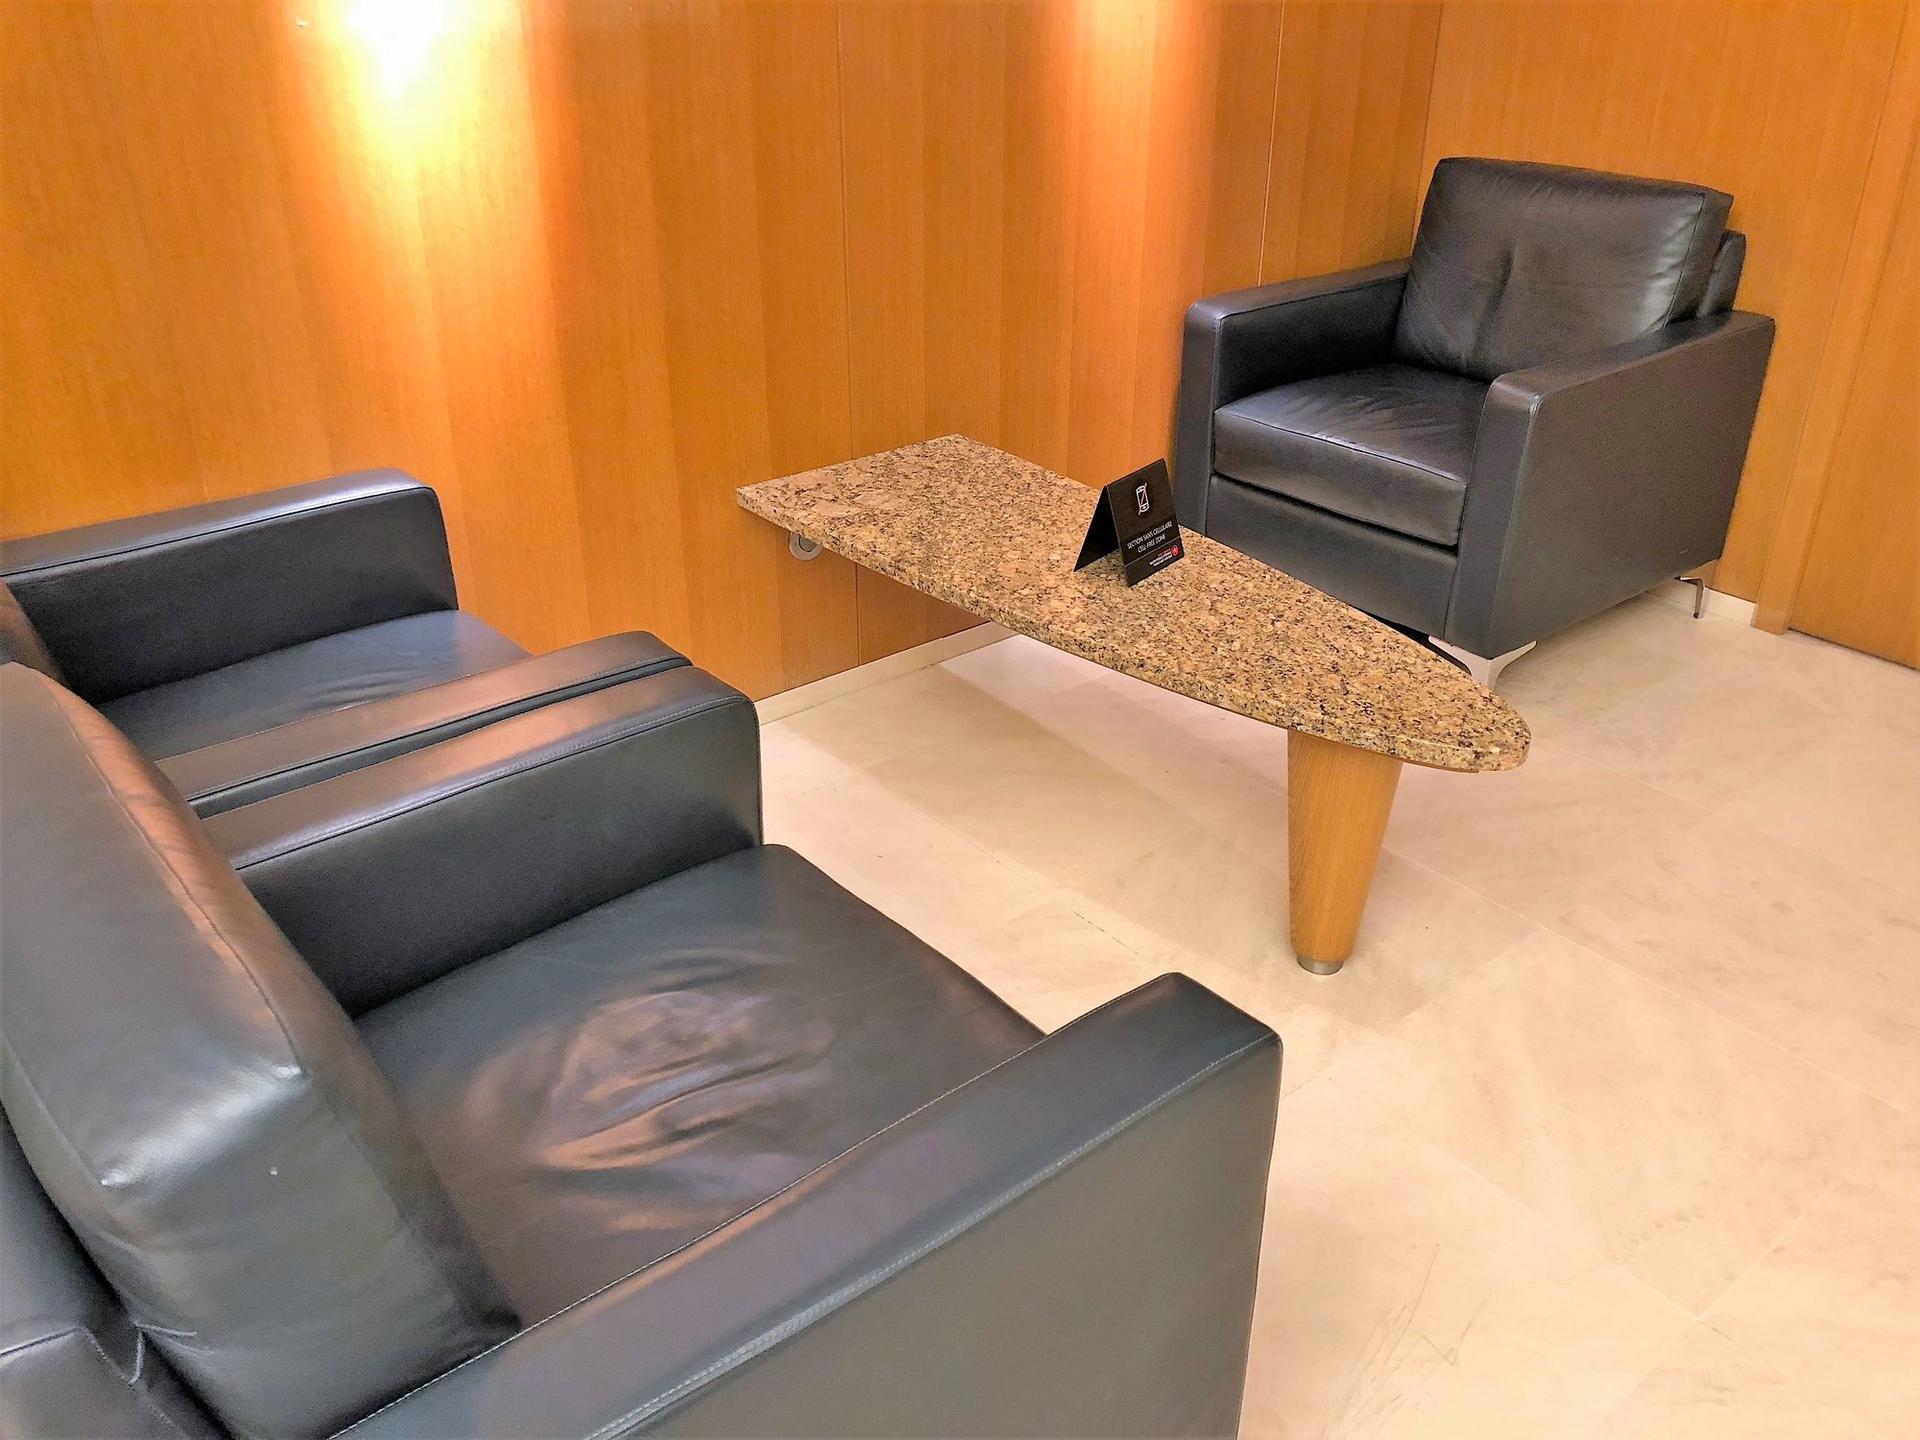 Air Canada Maple Leaf Lounge image 34 of 64